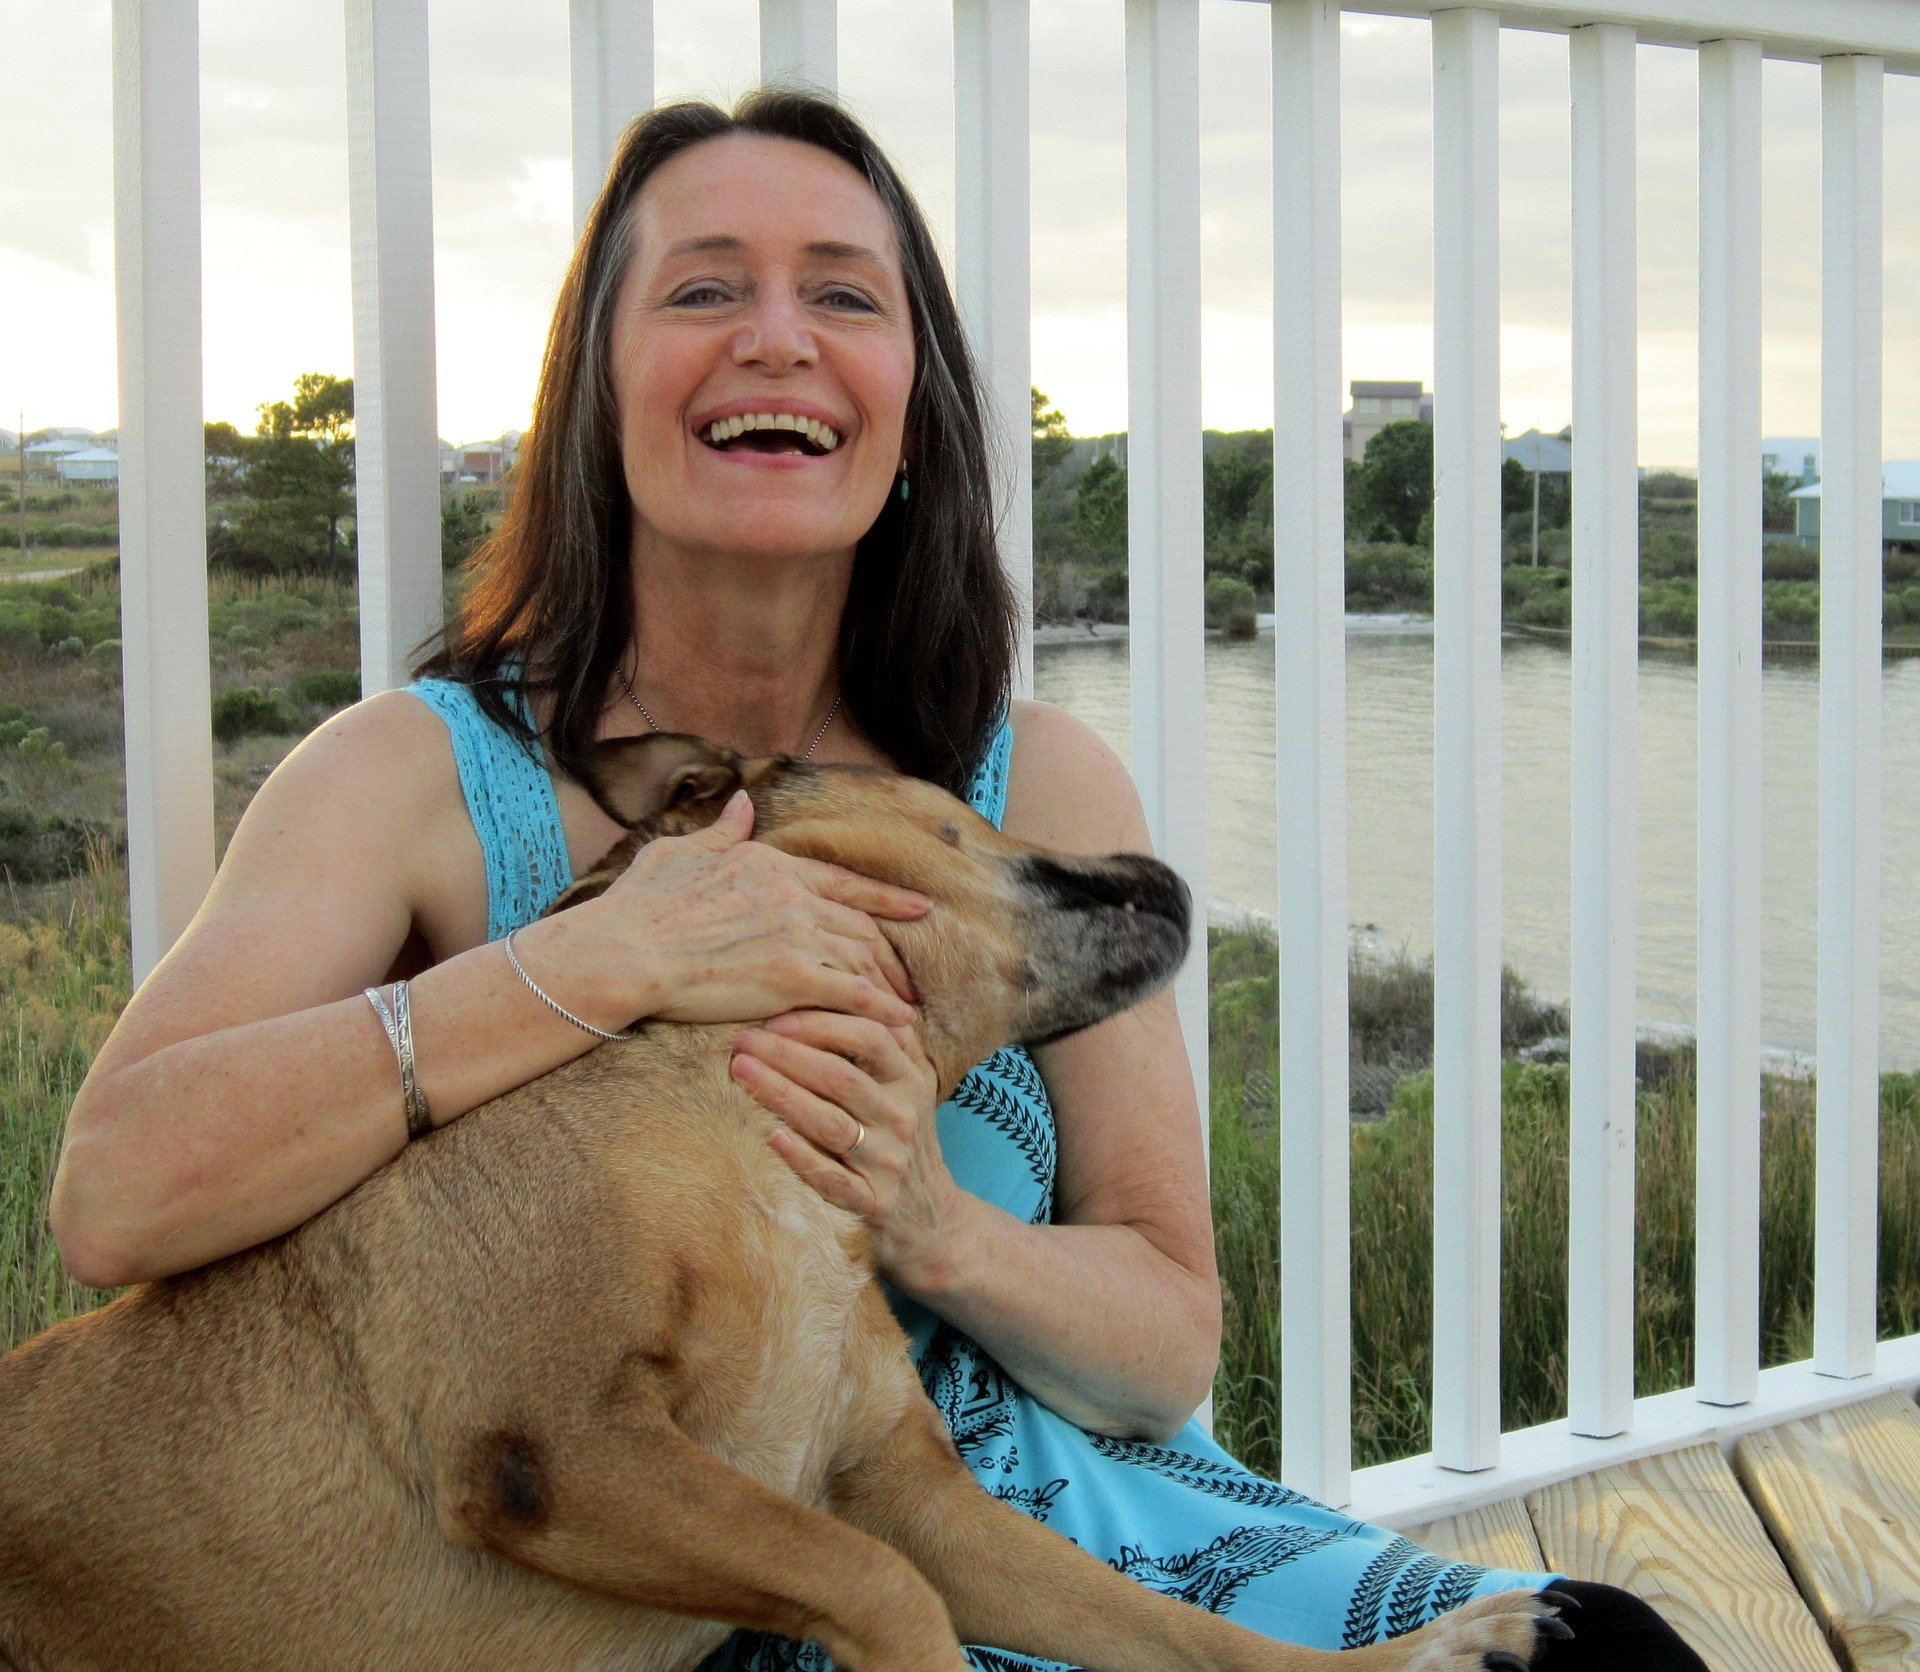 Woman wearing dentures smiling with a dog